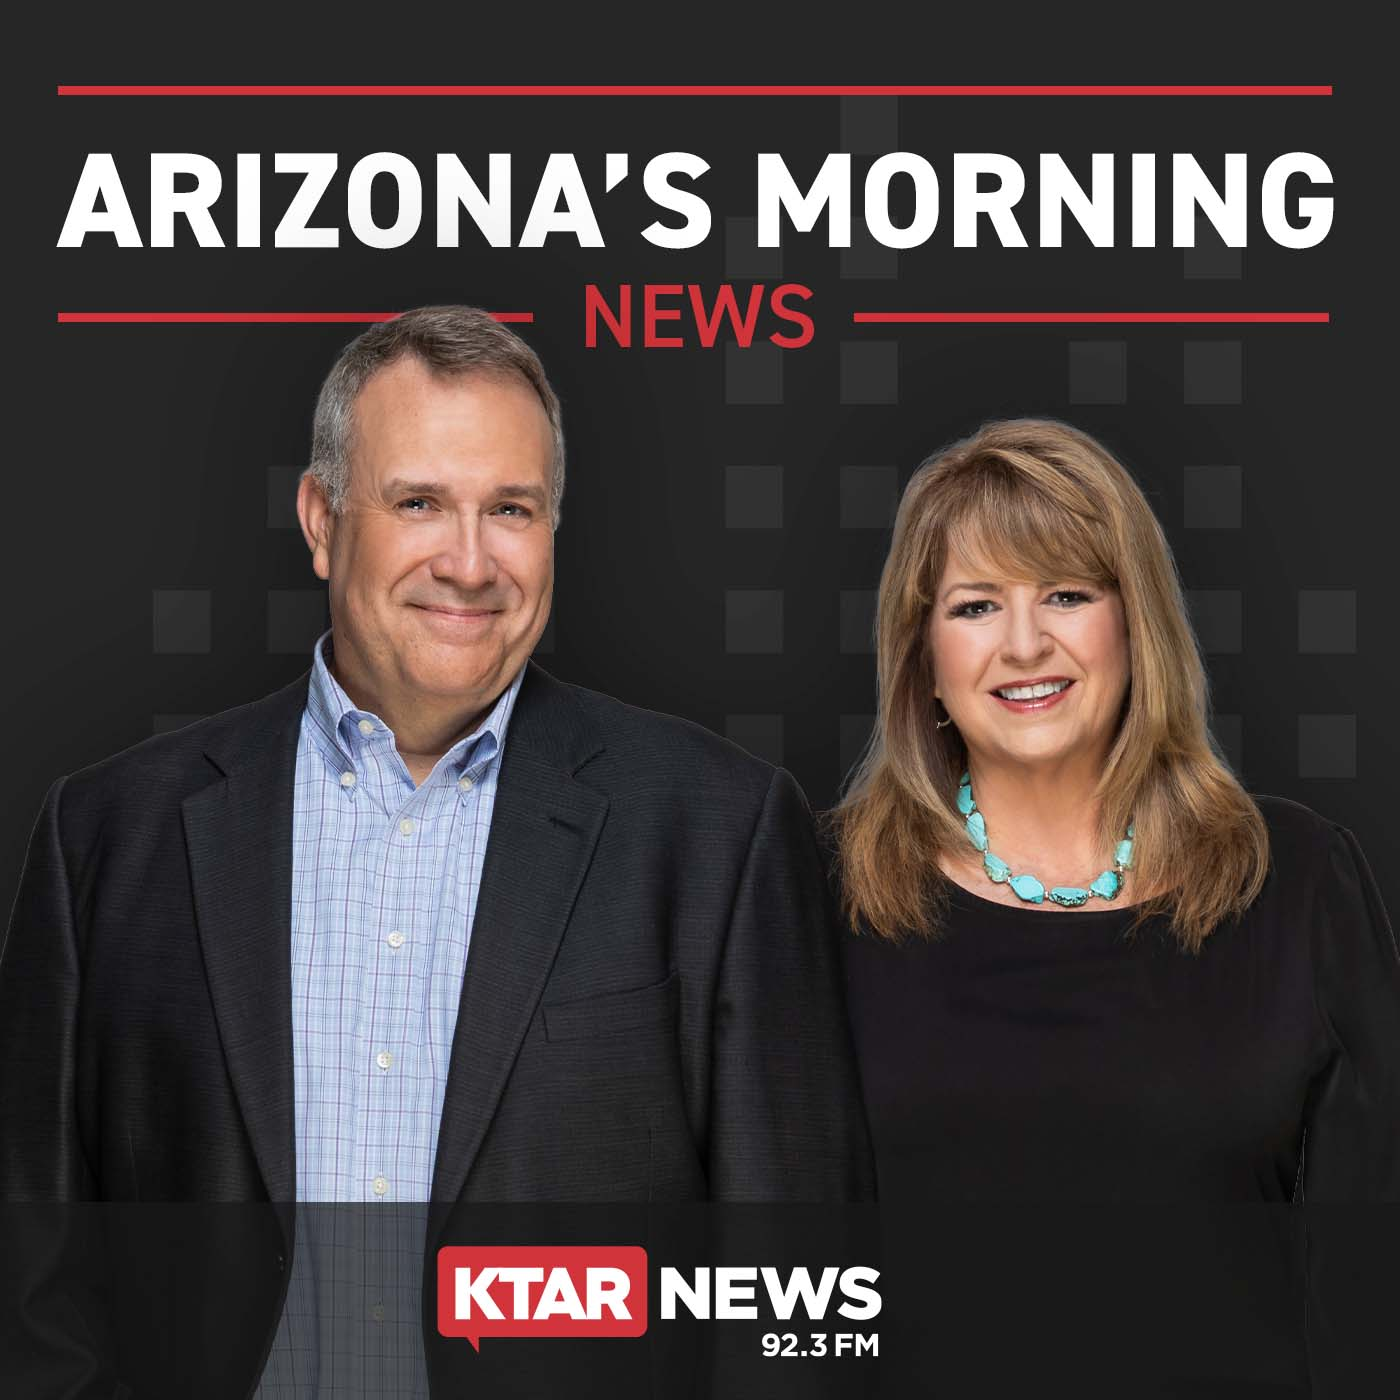 Sharper Point Commentary - Donald Trump's influence continues in Arizona